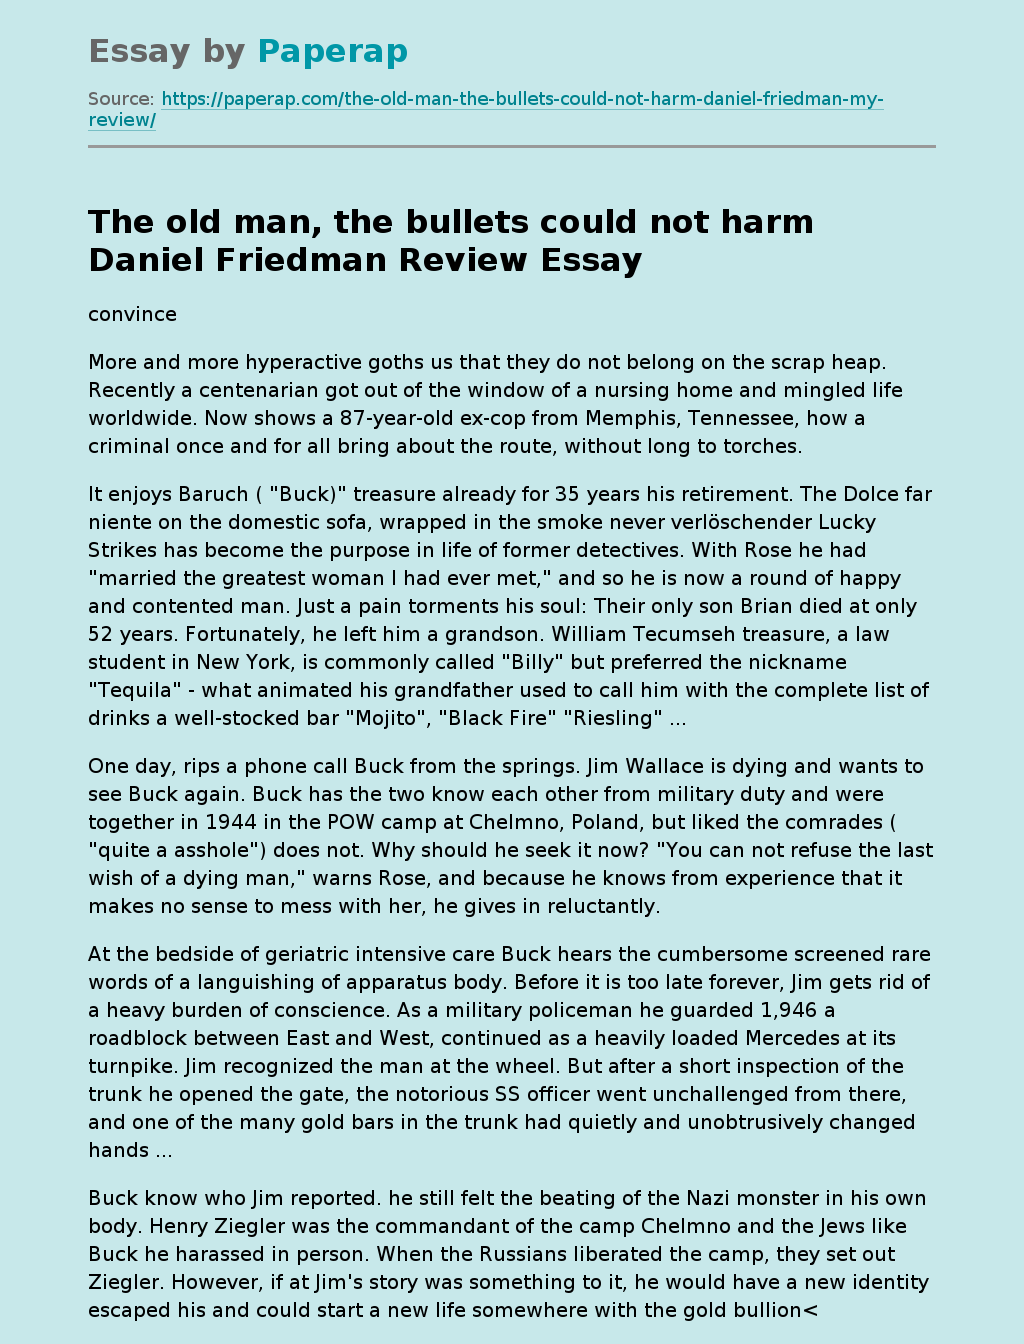 The old man, the bullets could not harm Daniel Friedman Review